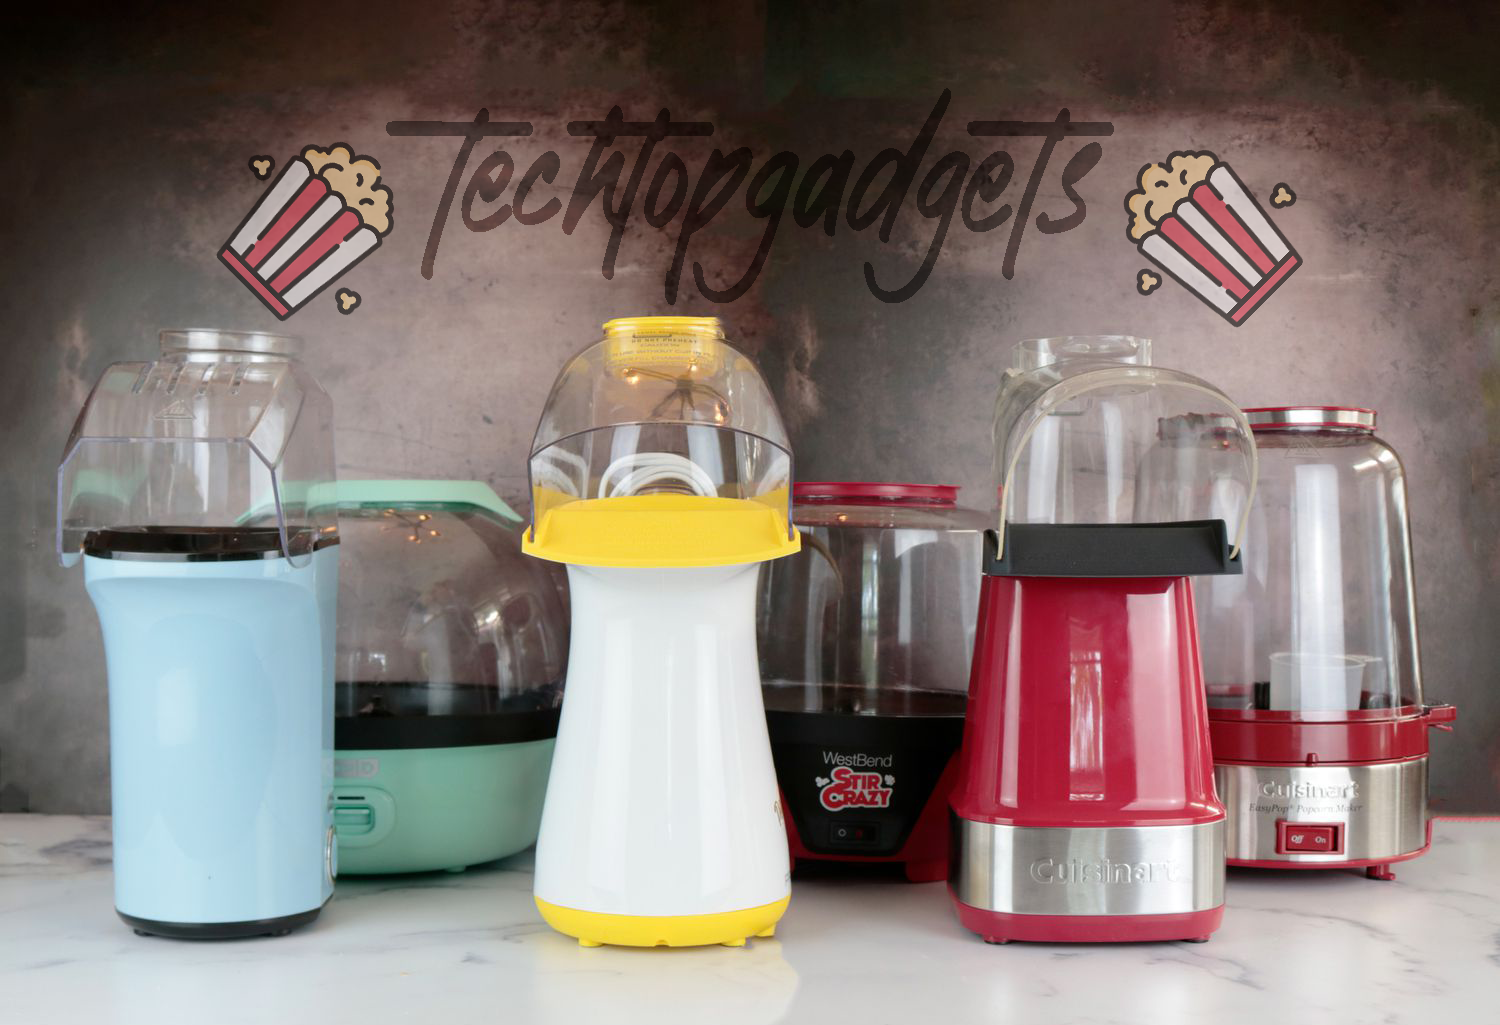 A lineup of the best air popcorn makers from brands like Dash, WestBend, and Cuisinart, ready to transform your snacking habits, set against a kitchen backdrop with a whimsical "TechTop Gadgets" logo overhead.